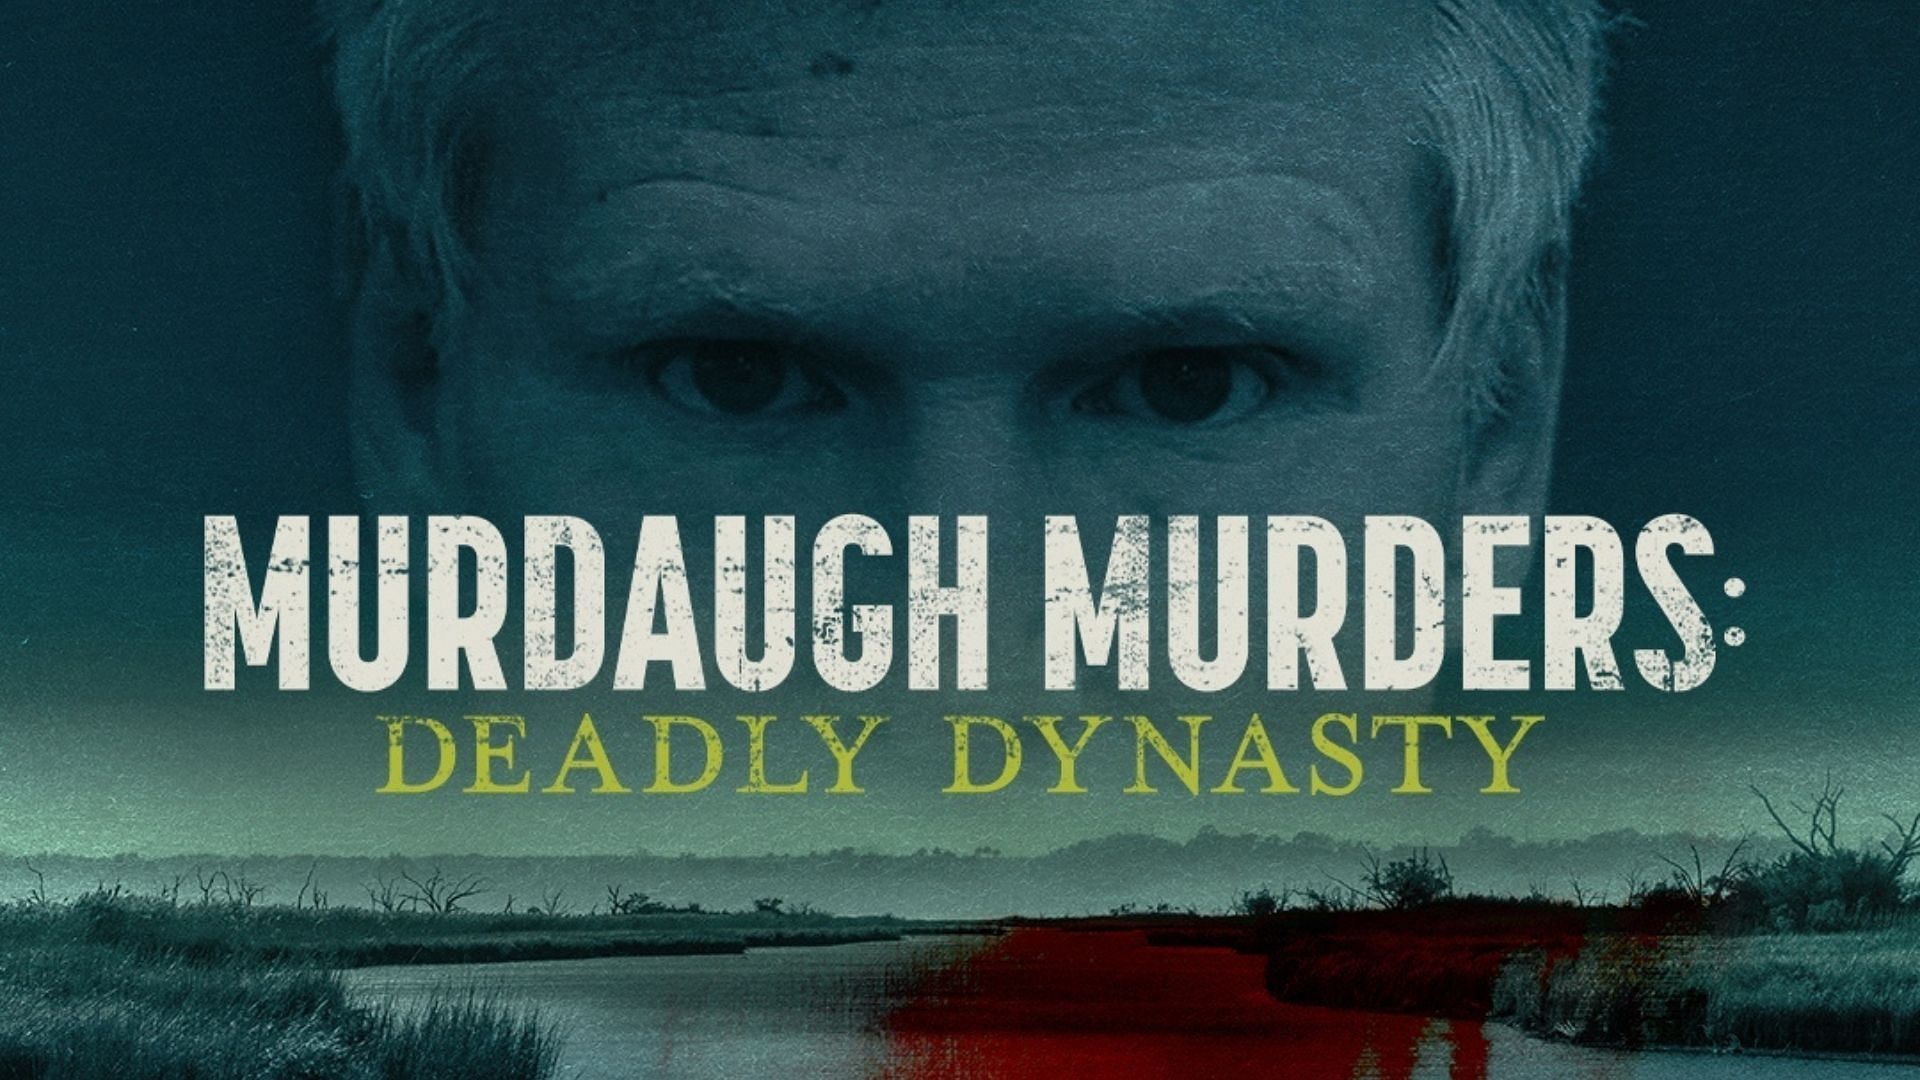 Murder of Paul and Maggie Murdaugh and it&#039;s aftermath will be explored in ID&#039;s Murdaugh Murders: Deadly Dynasty (Image Via investigationdiscovery/Instagram)